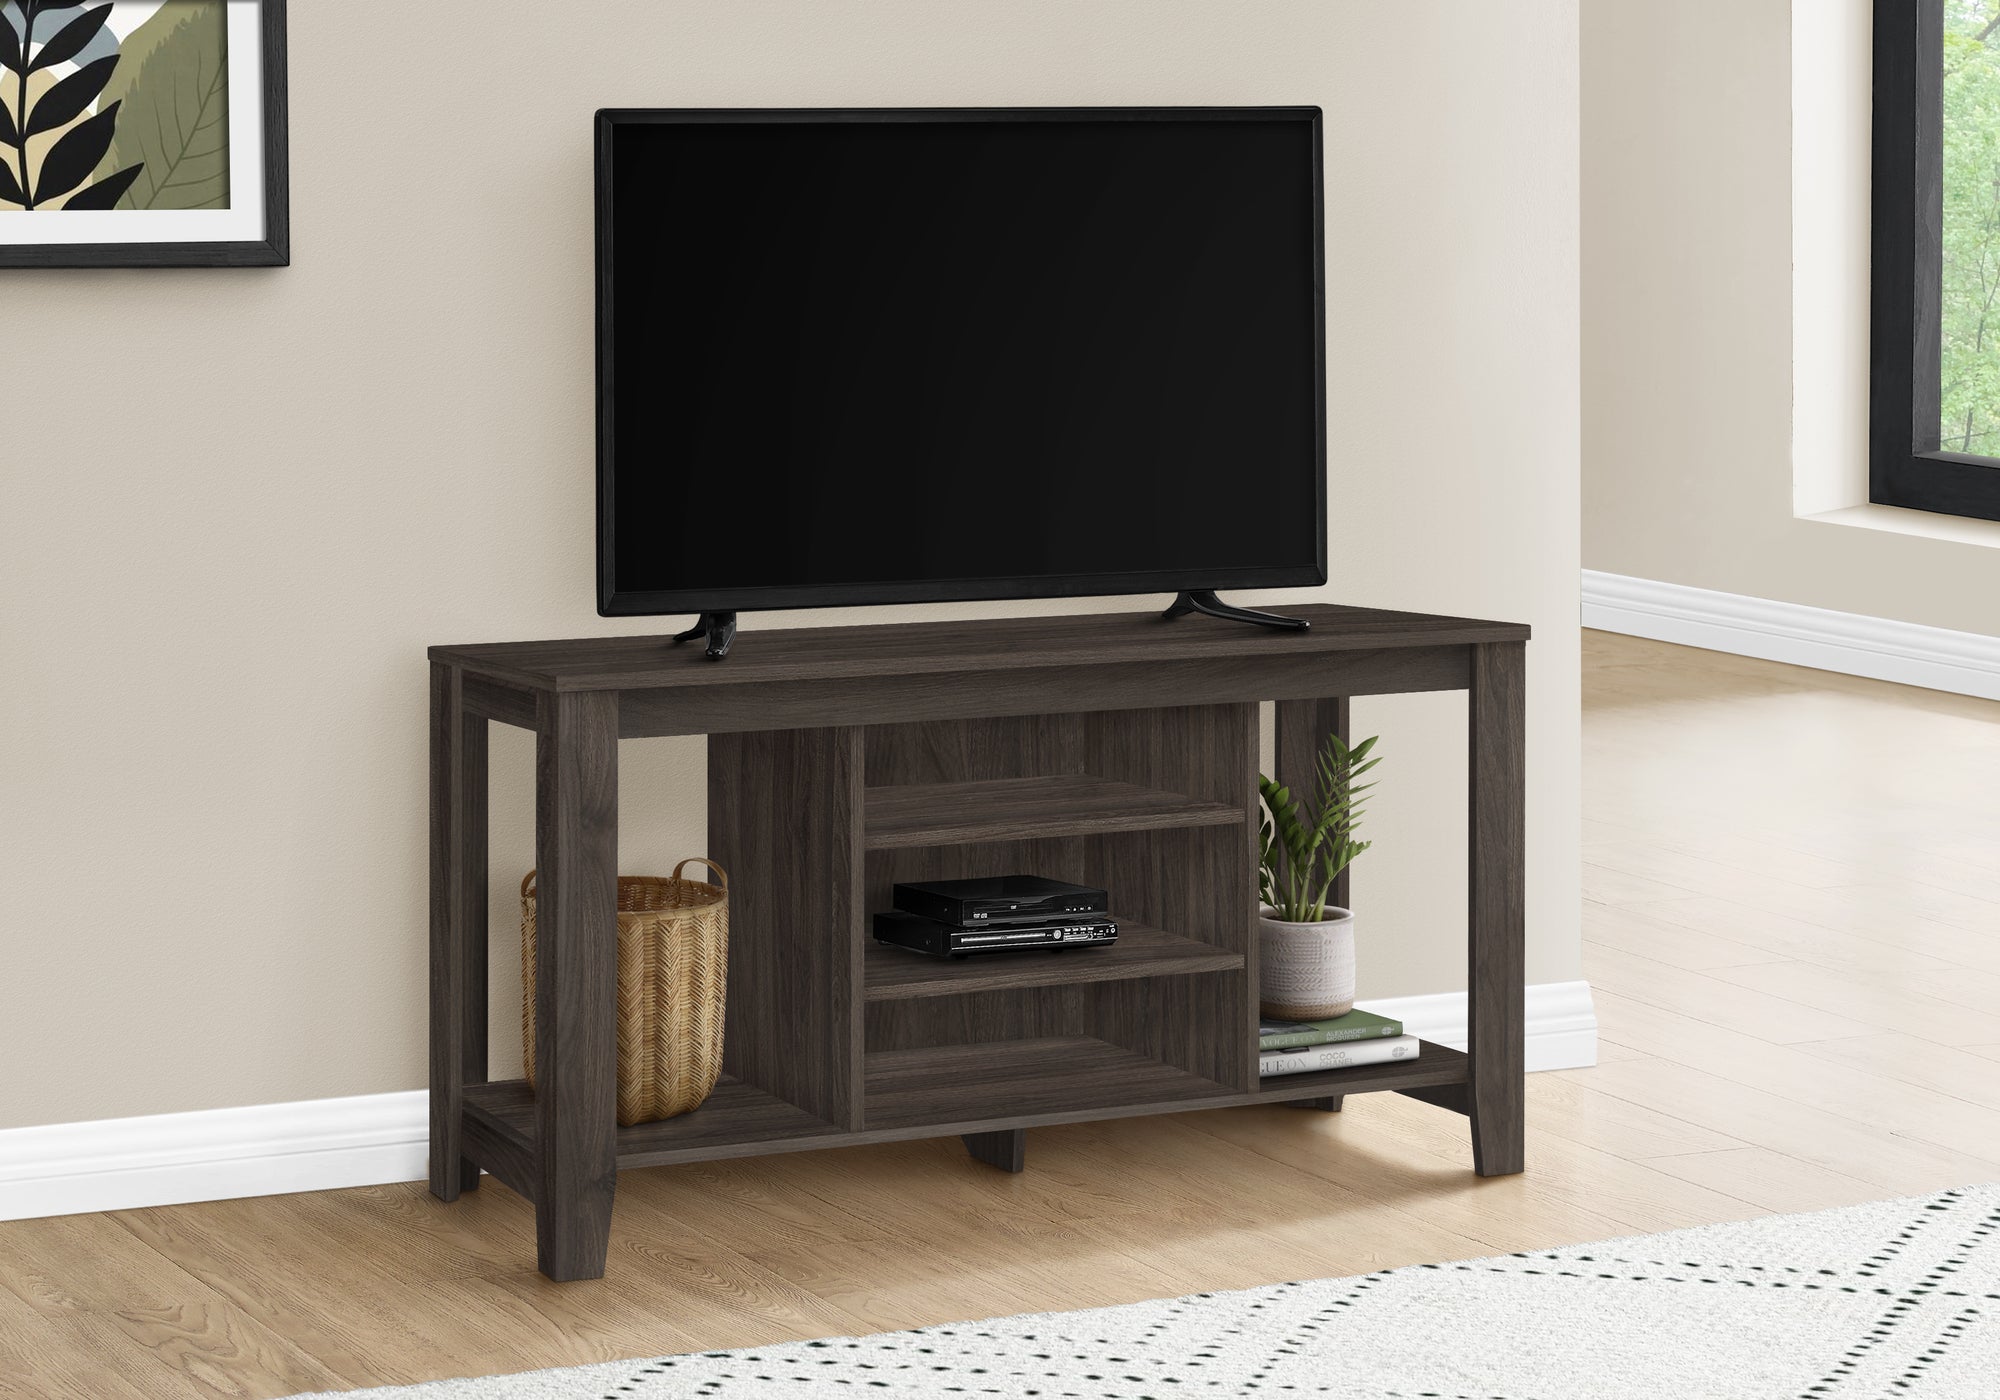 MN-353567    Tv Stand, 48 Inch, Console, Media Entertainment Center, Storage Cabinet, Living Room, Bedroom, Laminate, Brown Oak, Contemporary, Modern